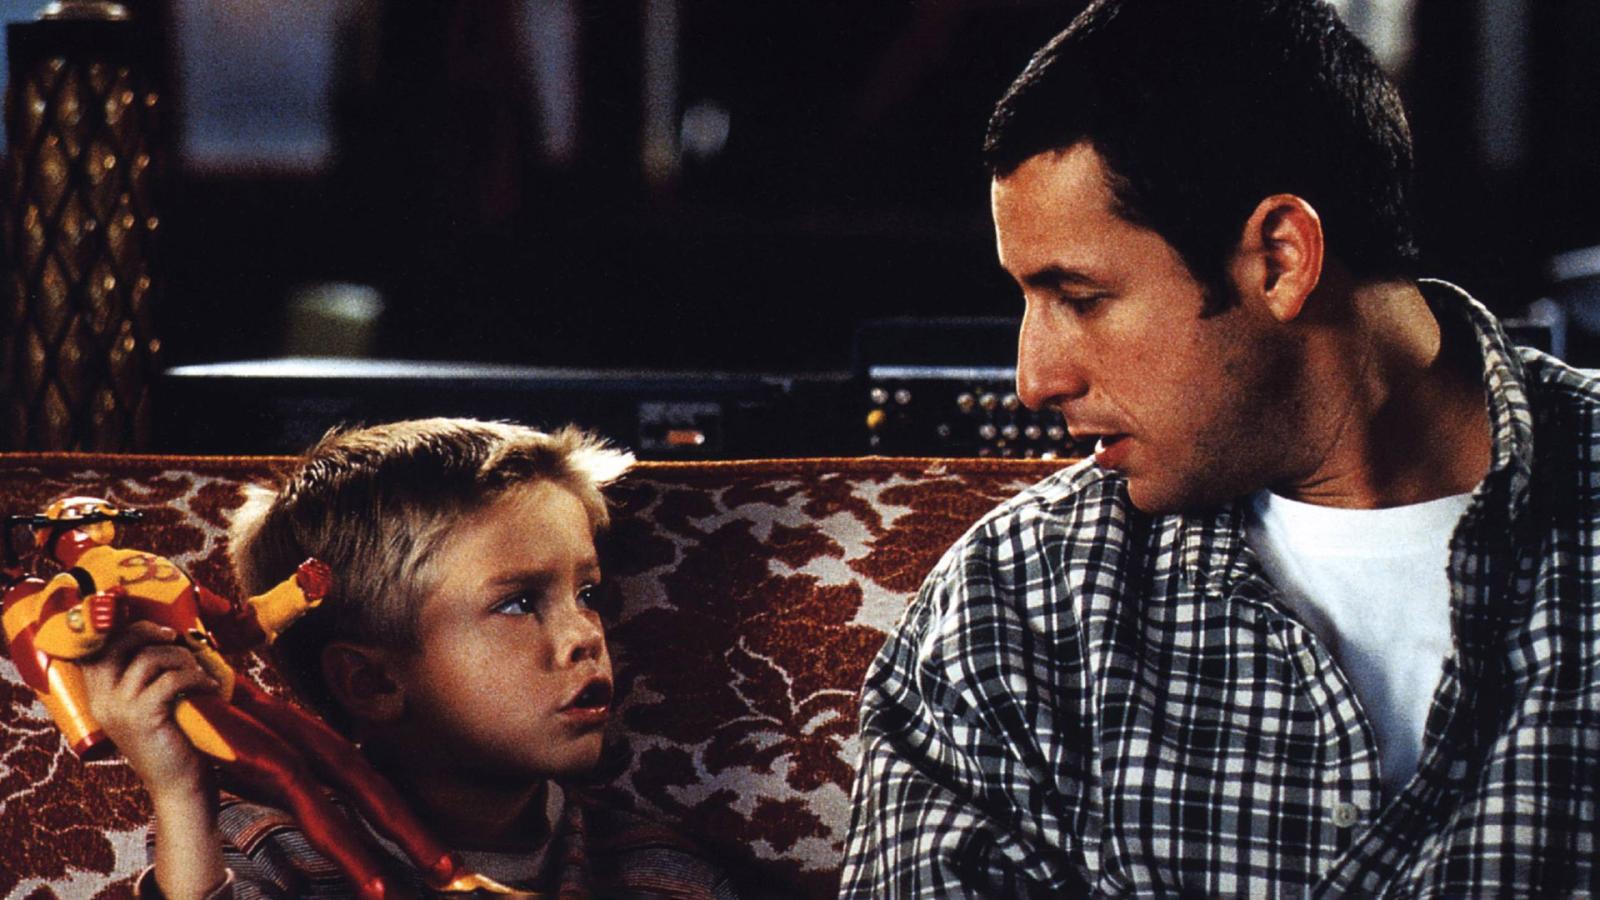 15 Best Movies With Adam Sandler to Watch With Family - image 2